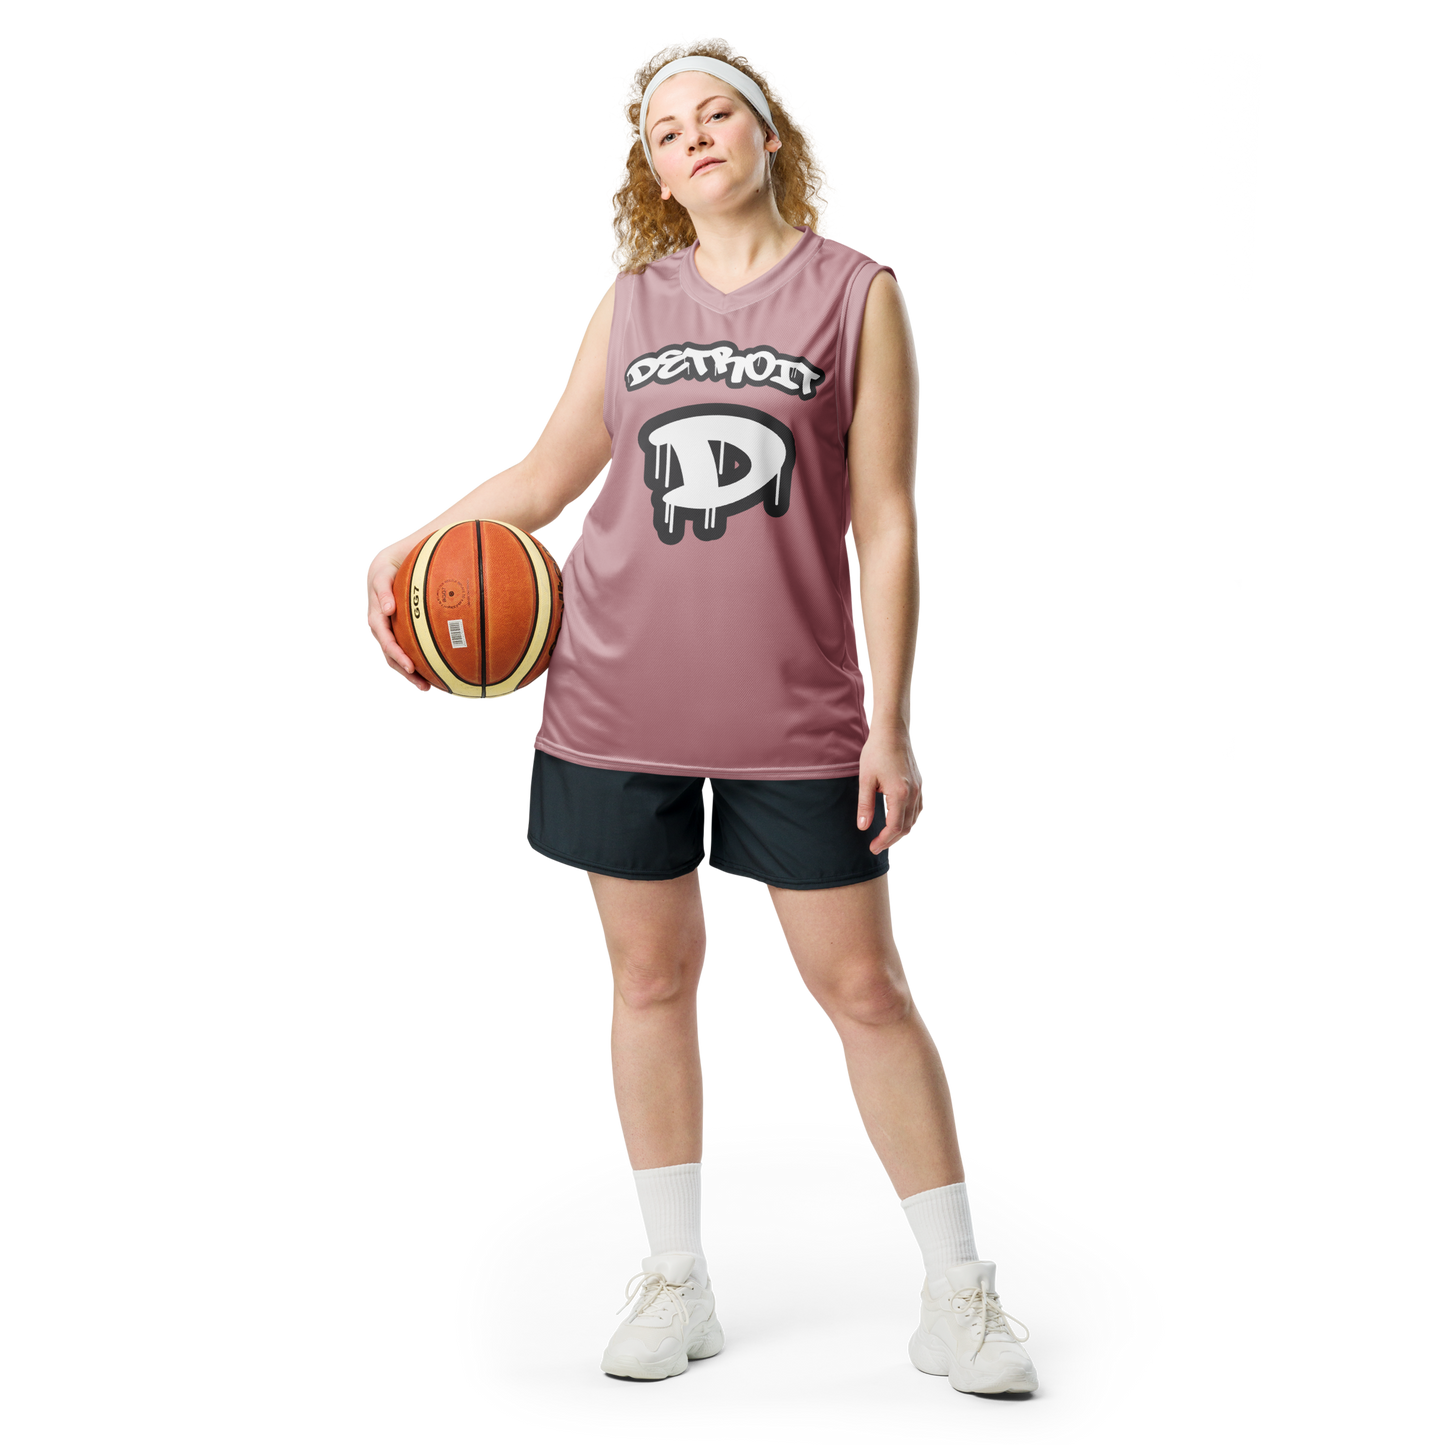 'Detroit 313' Basketball Jersey (Tag Edition) | Unisex - Cherry Blossom Pink